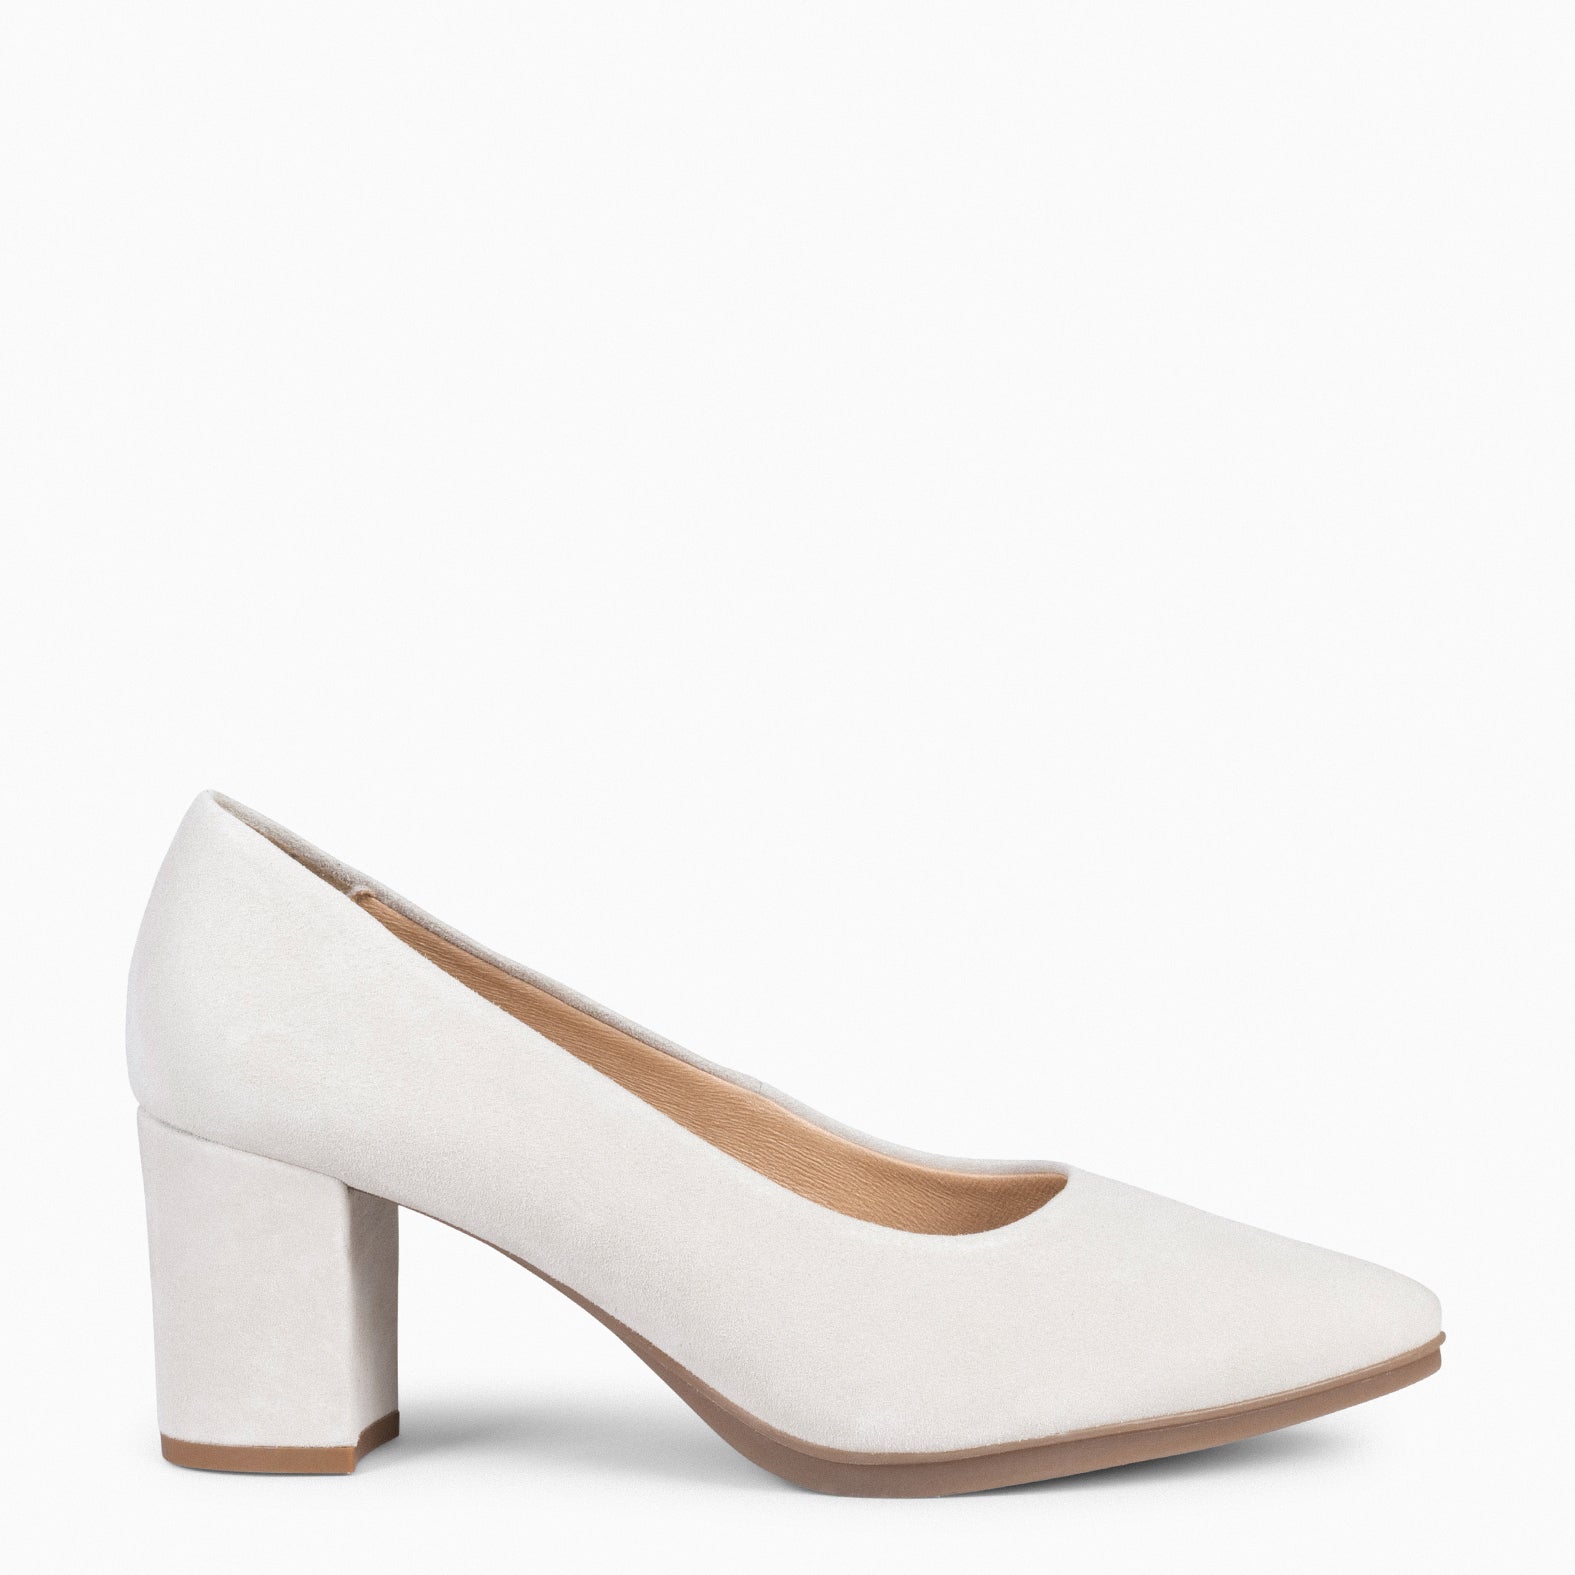 URBAN S – WHITE Suede Mid-Heeled Shoes 